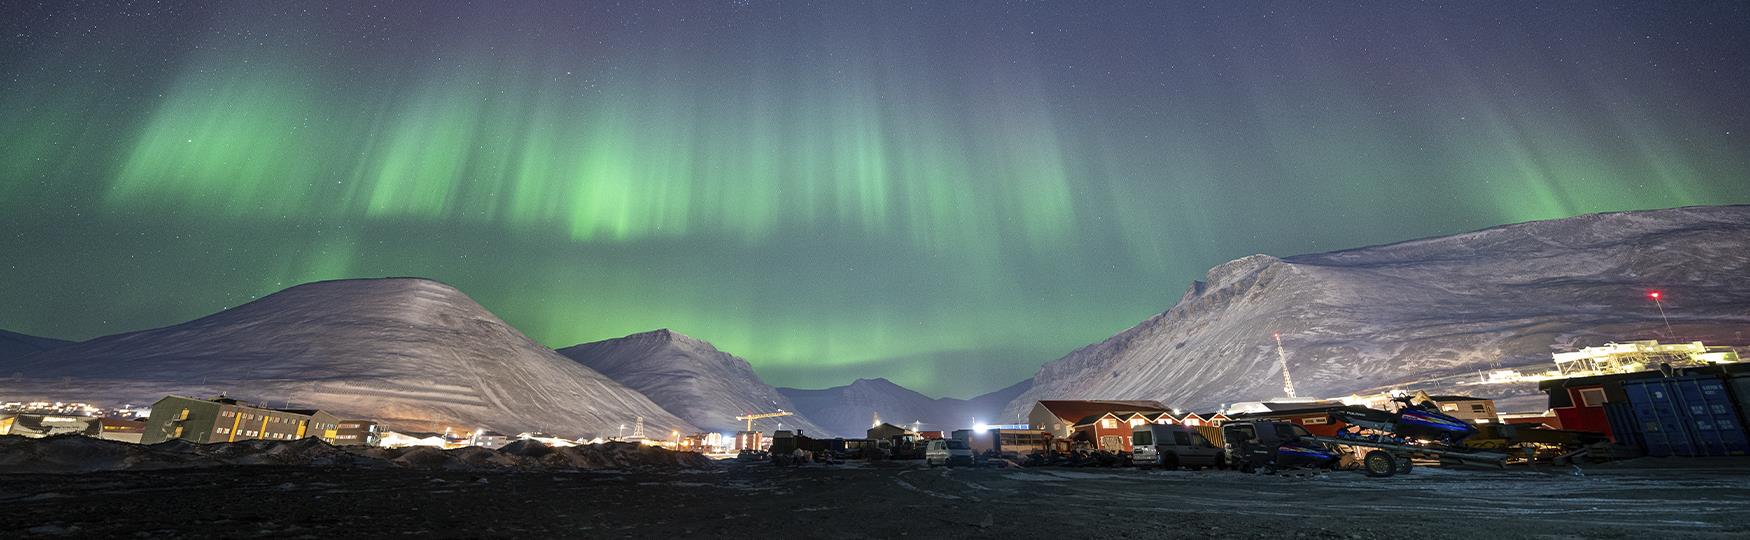 A town with snow-covered mountains and northern lights in the background